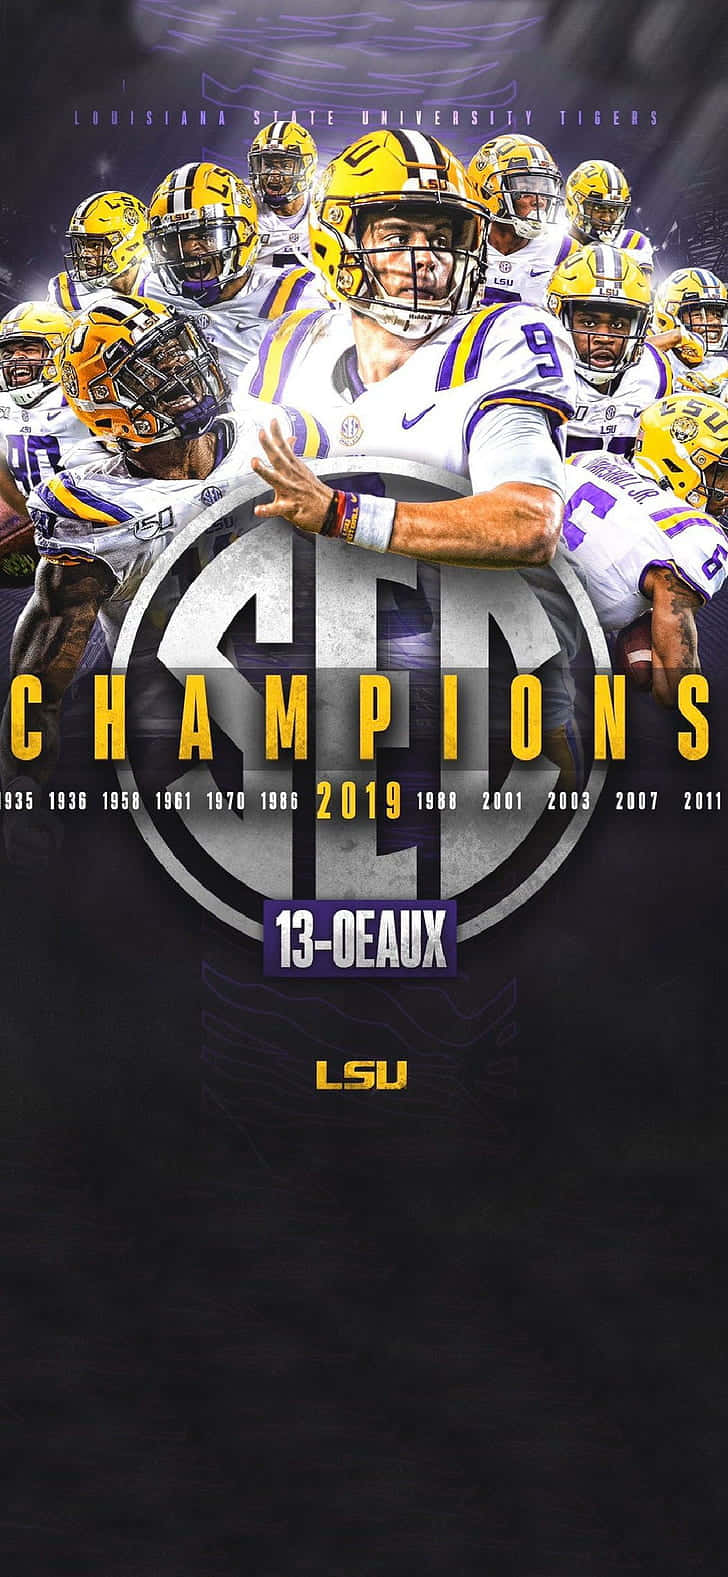 Get your favorite LSU Tigers team logo as wallpaper for your iPhone Wallpaper